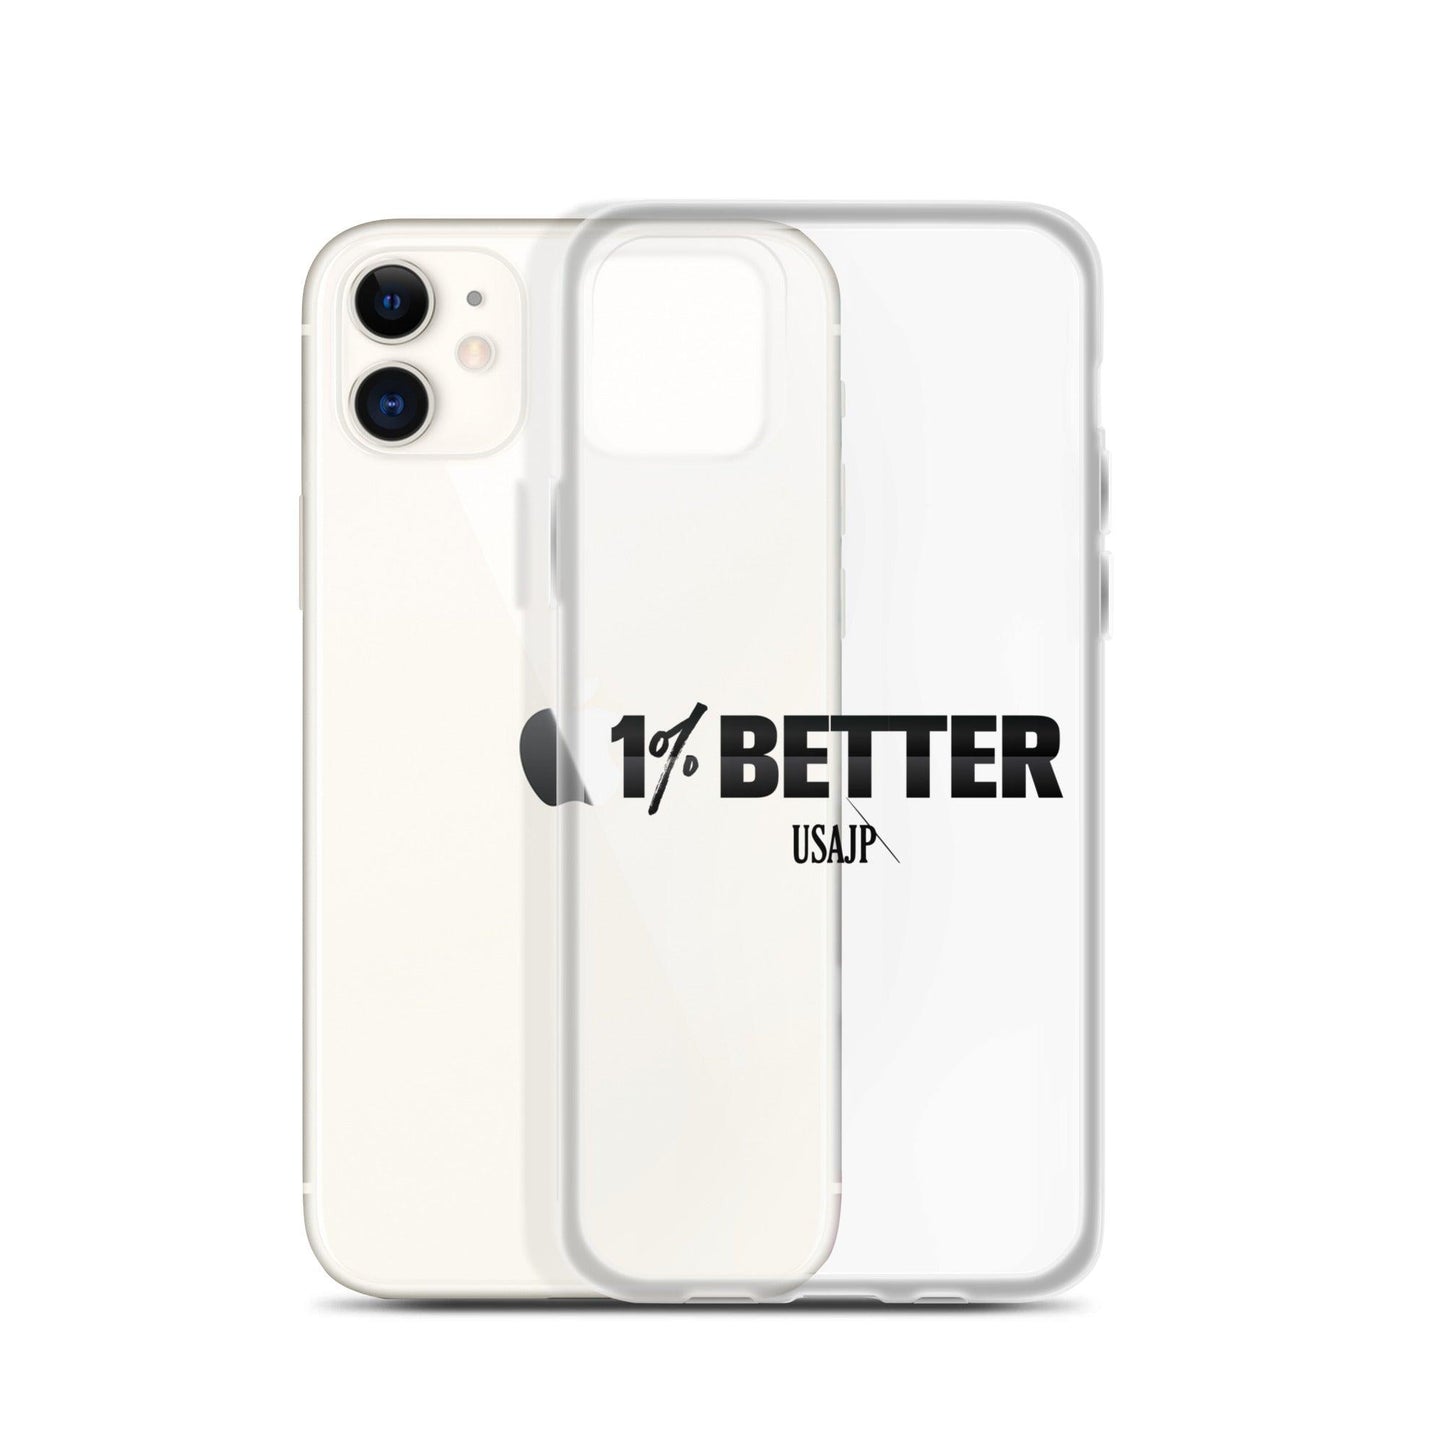 Curtis Thompson "1% Better" iPhone Case - Fan Arch